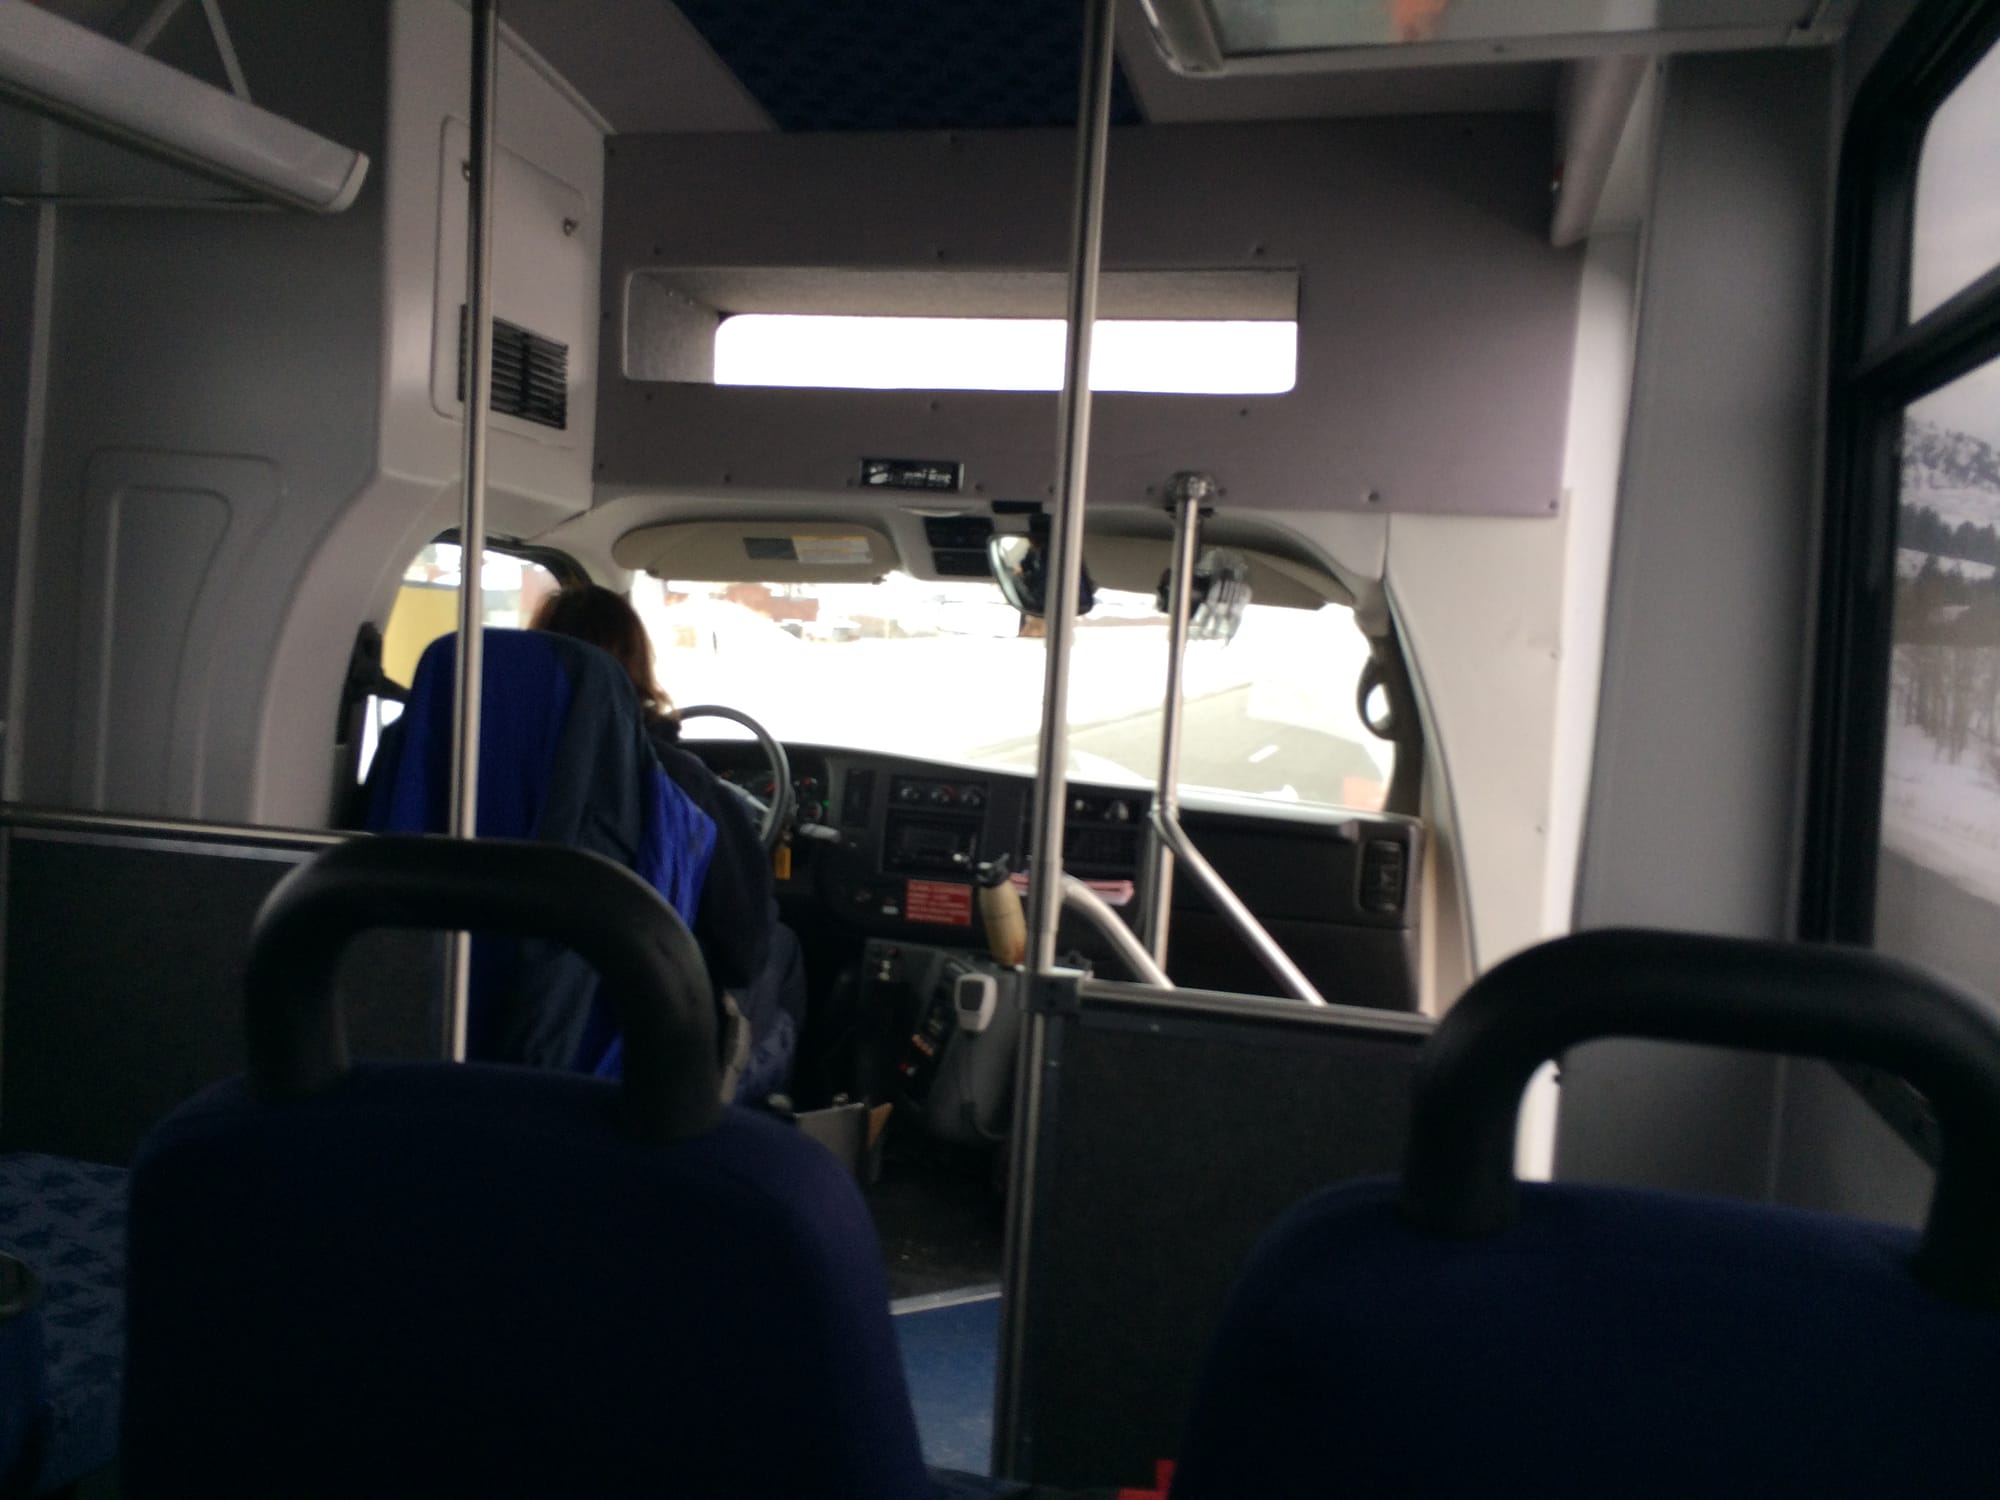 Photo by Author — the interior of the coach